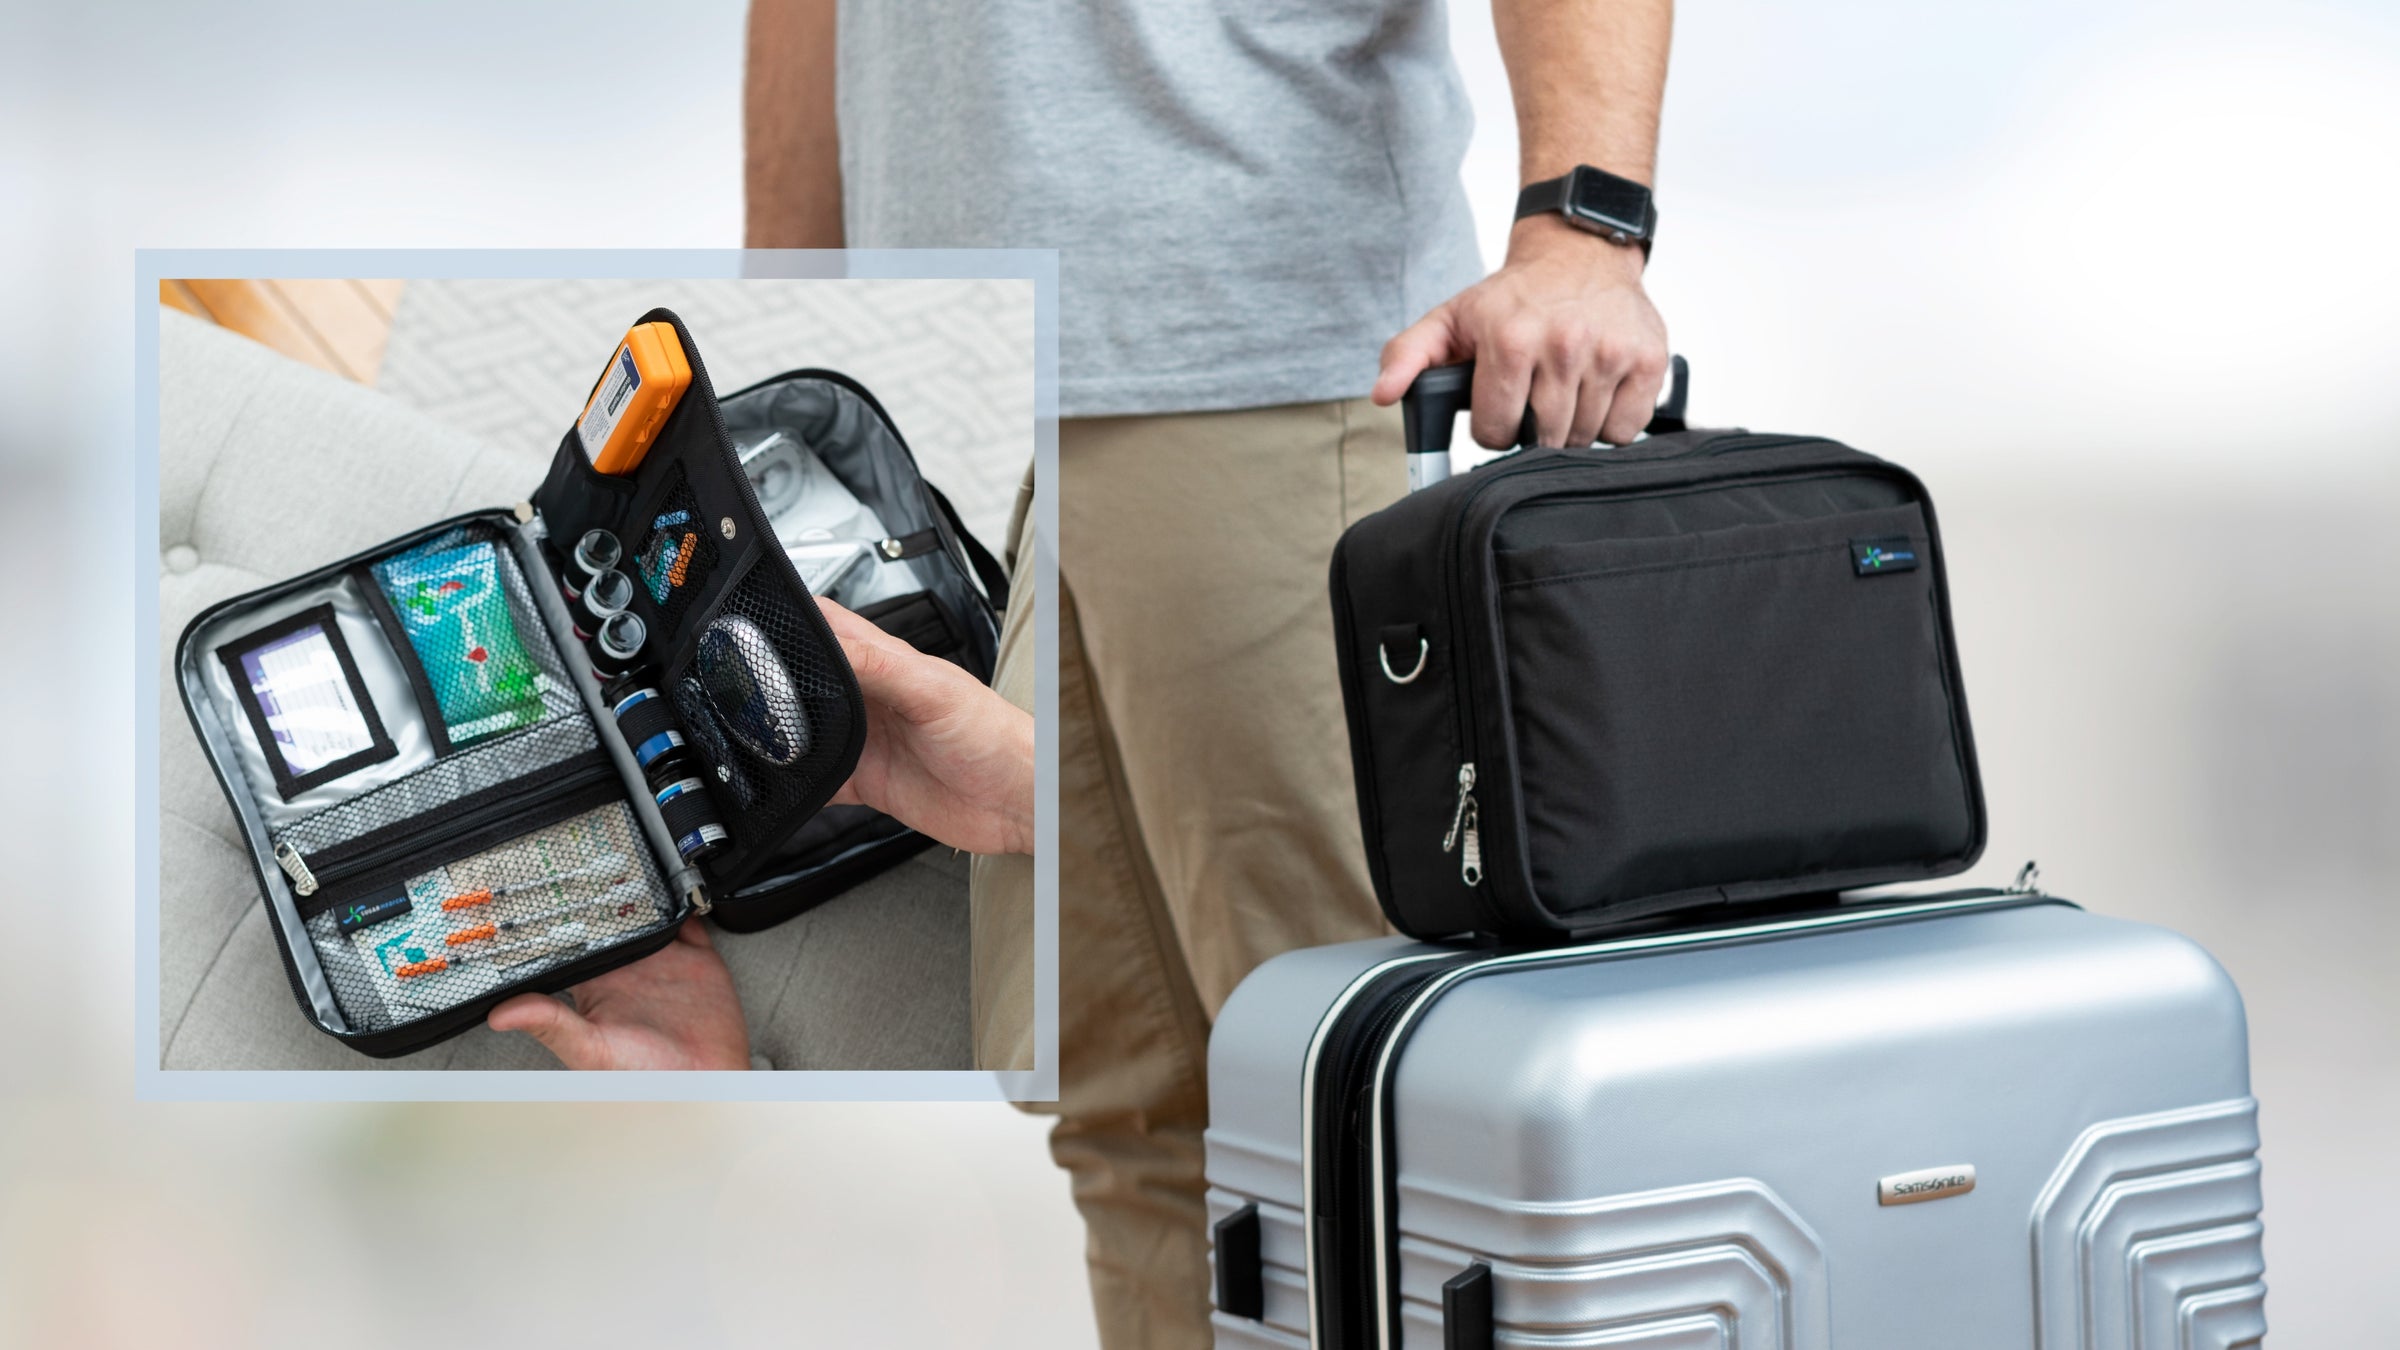 Leave the stress behind with the Sugar Medical Insulated Diabetes Travel Bag to organize all your diabetic supplies. 